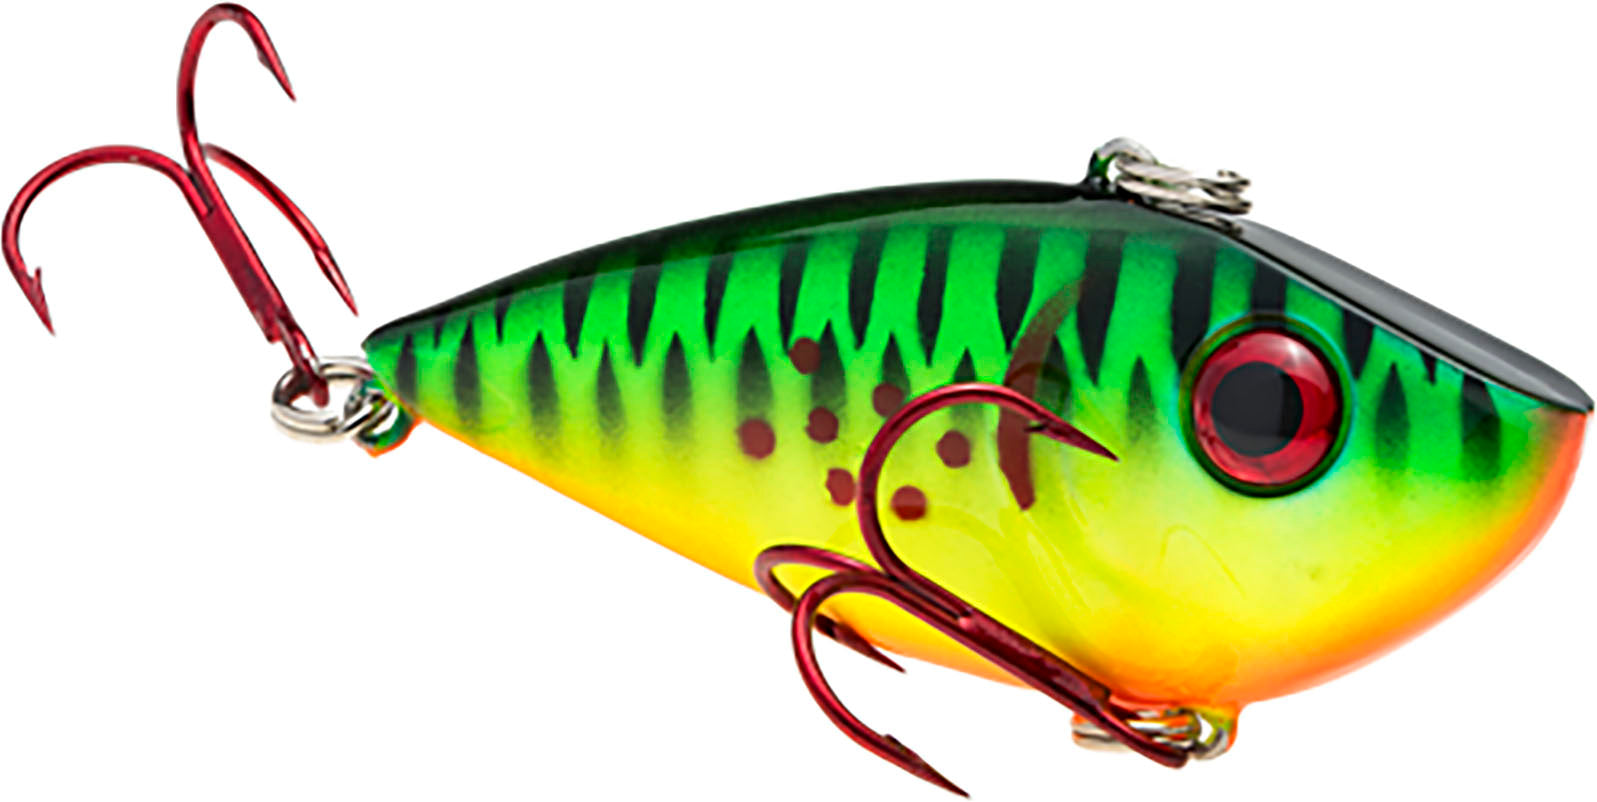 Strike King Red Eyed Shad Lipless Crankbait - 2.25 Inch — Discount Tackle